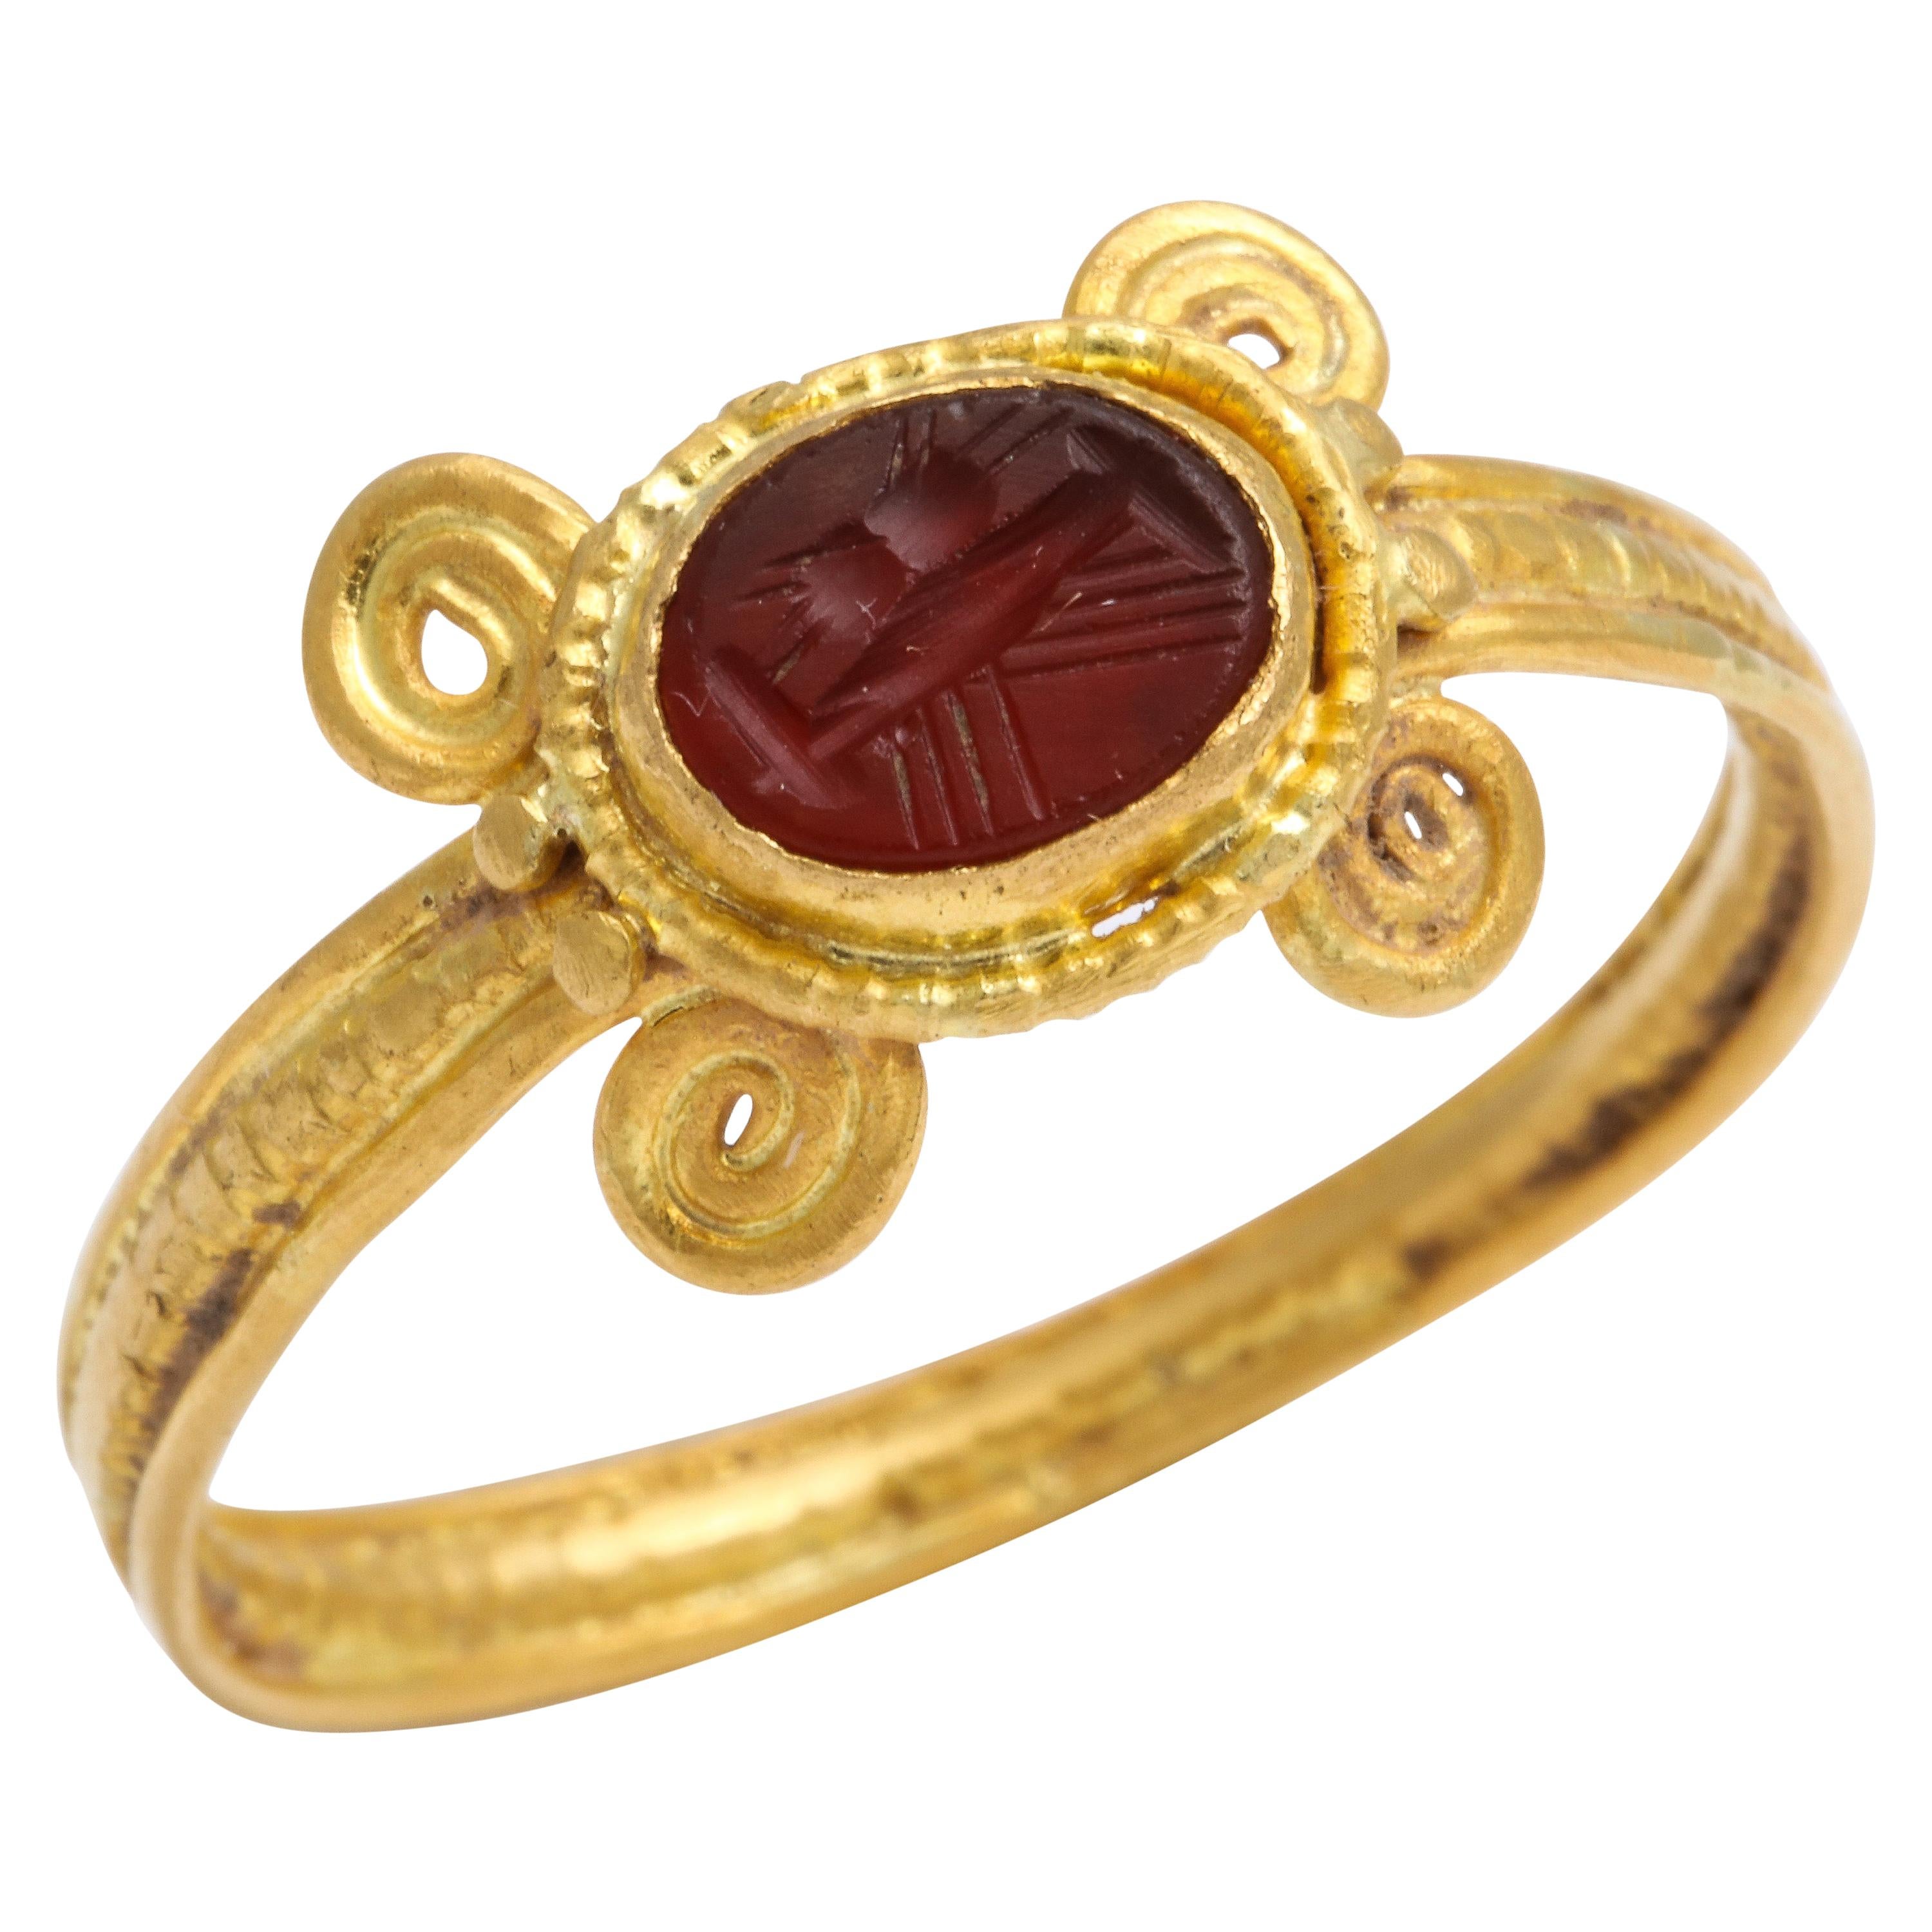 What is a Roman intaglio ring?